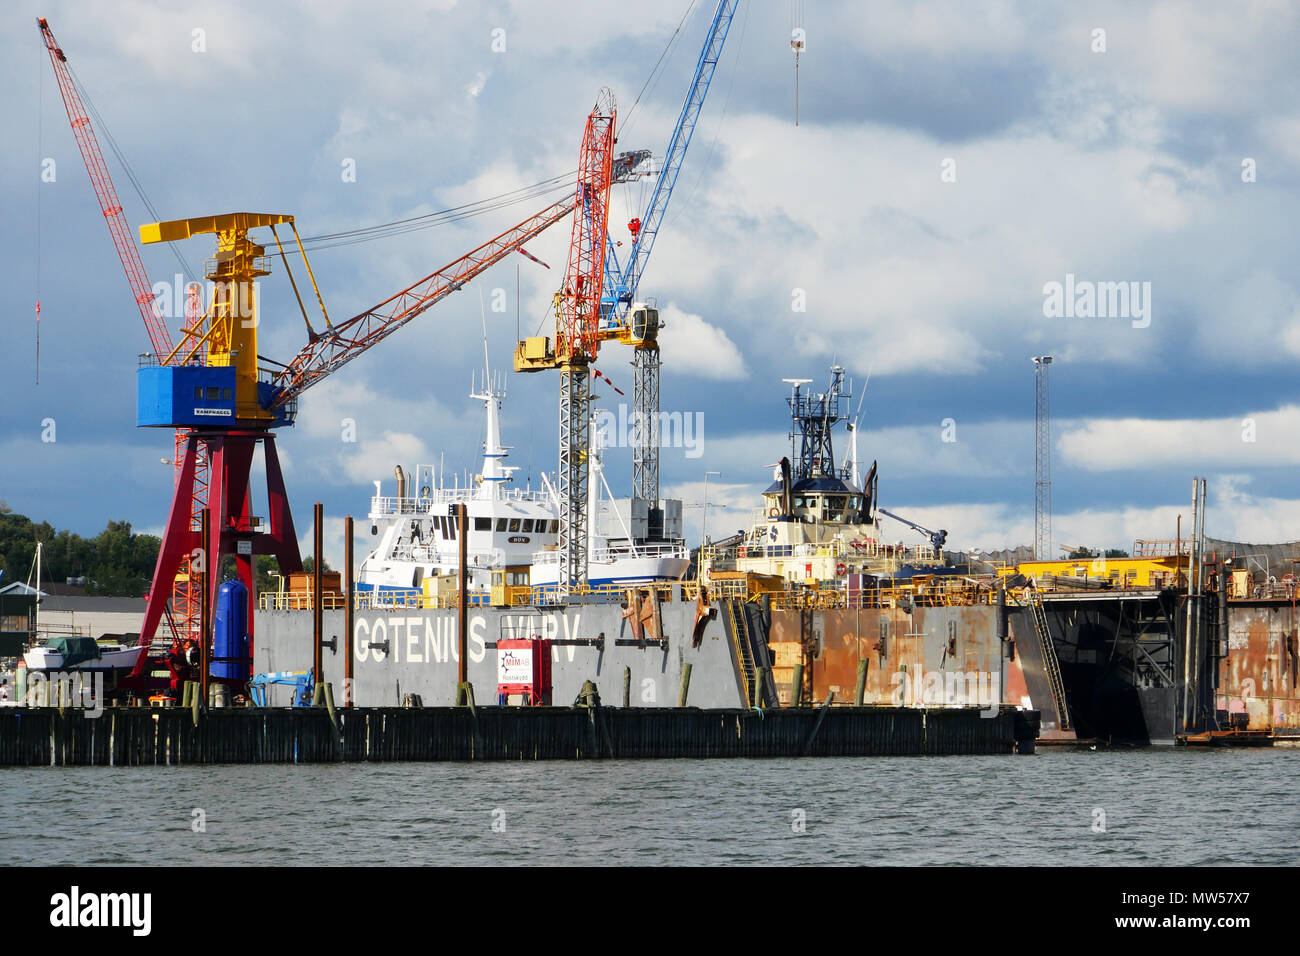 Ships being refitted in Gothenburg, Sweden Stock Photo